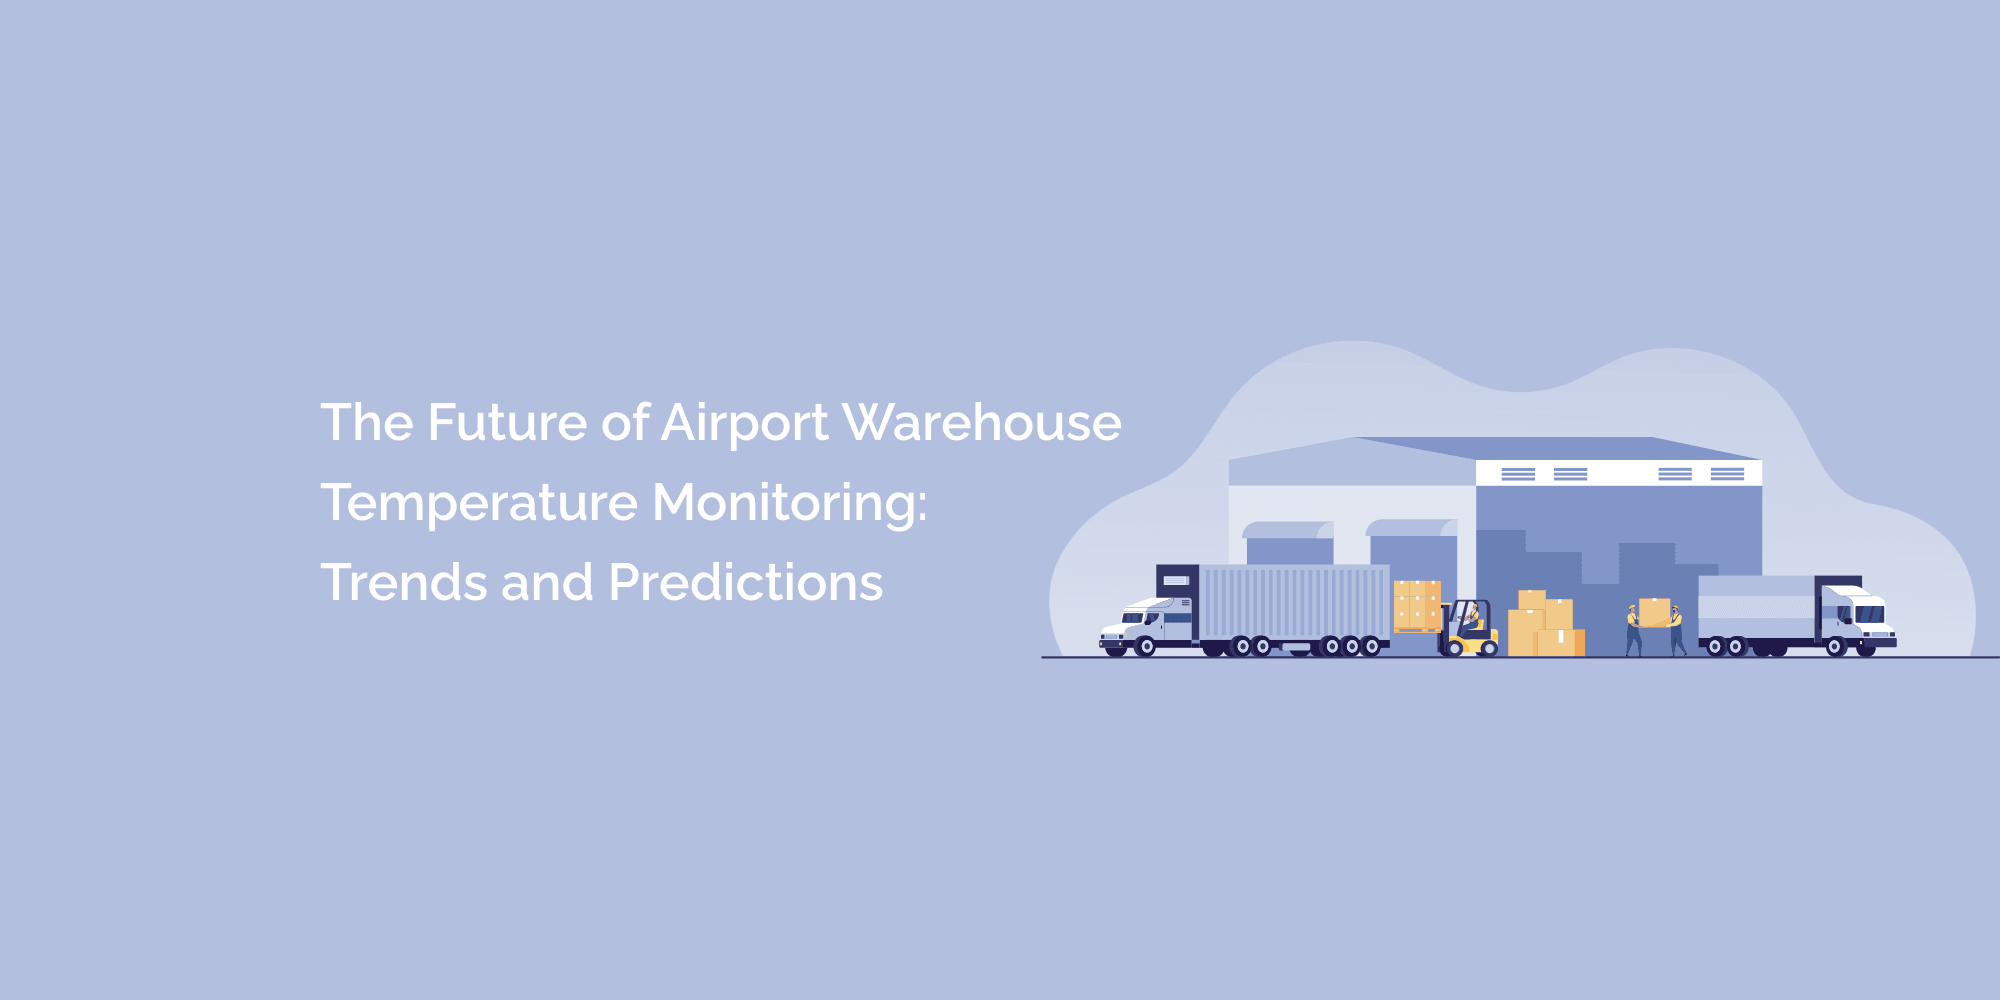 The Future of Airport Warehouse Temperature Monitoring: Trends and Predictions